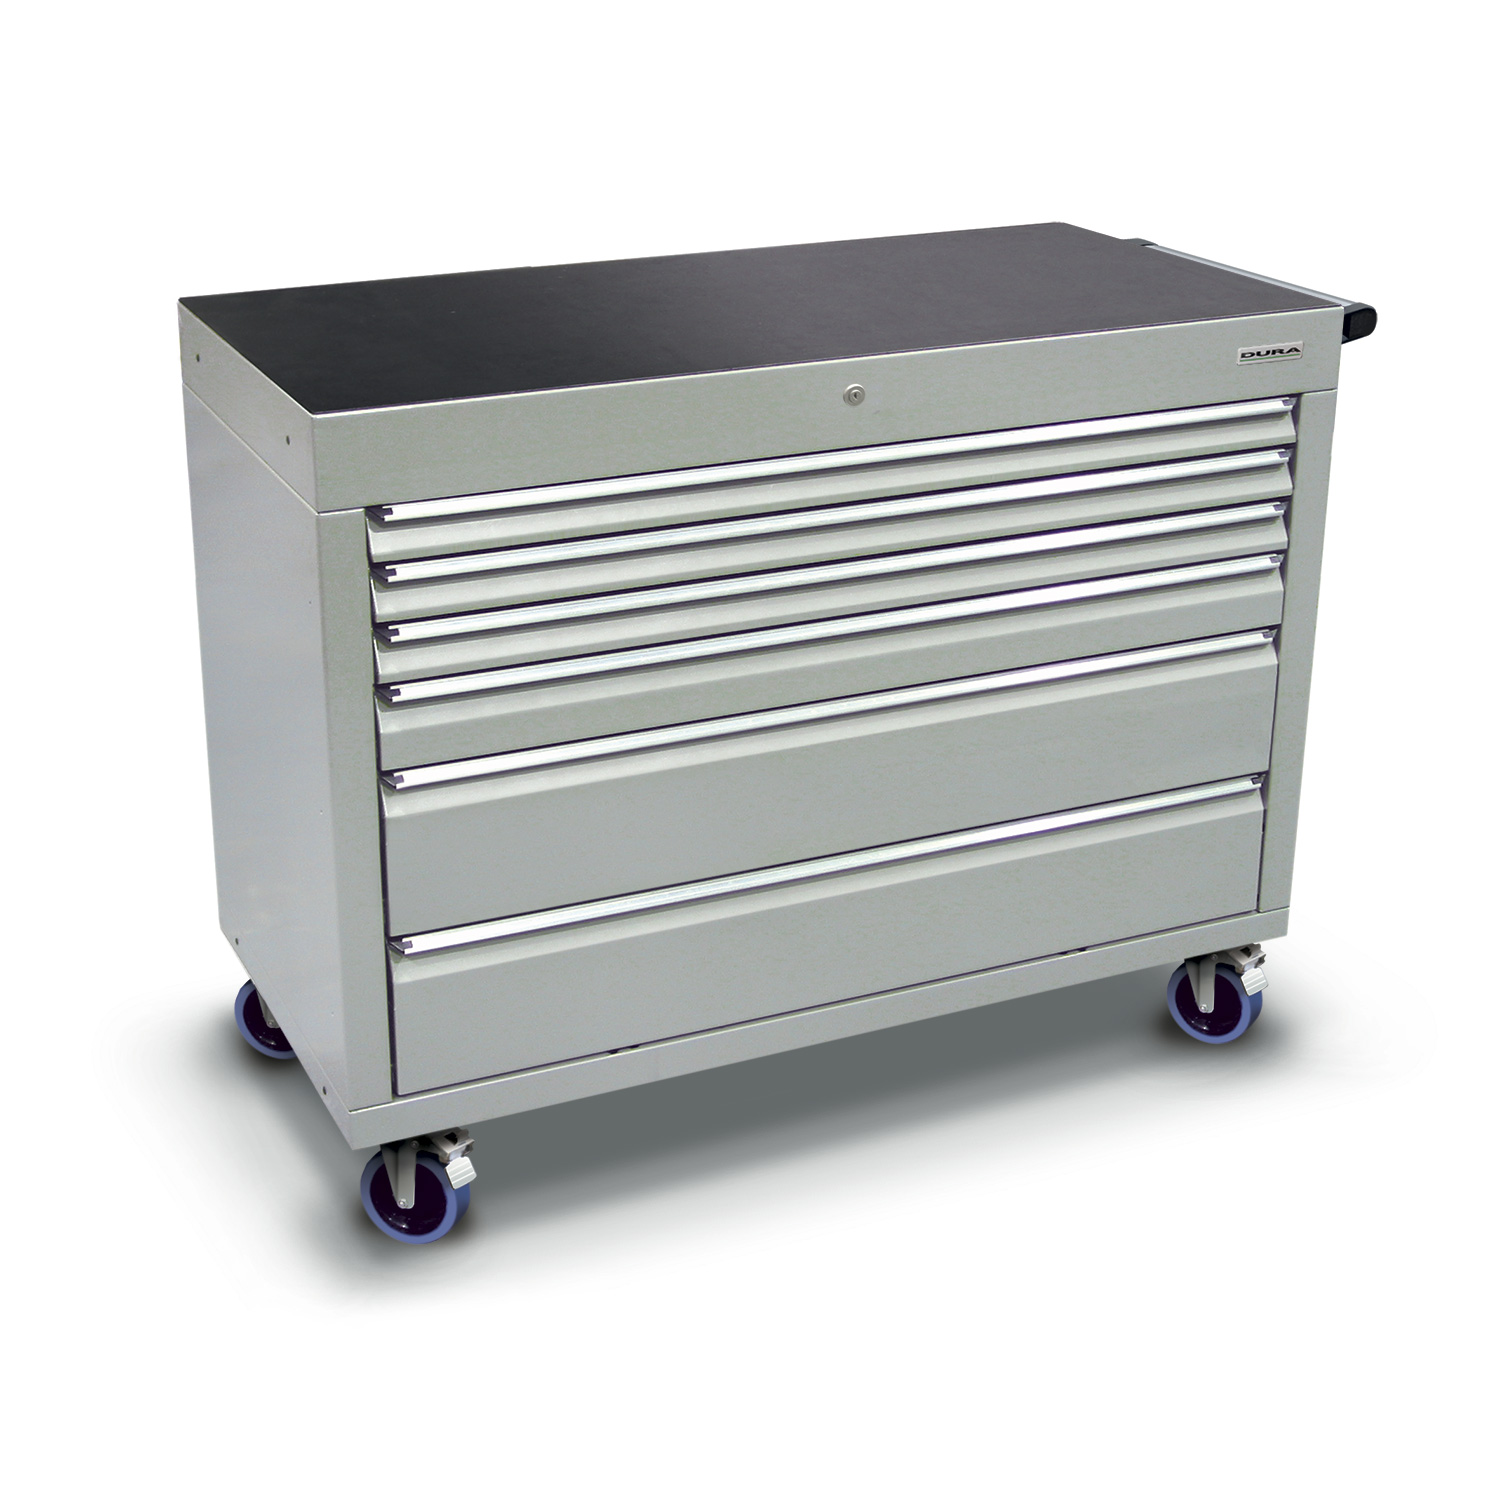 1200 series cabinet with 6 drawers (3 slim, 1 medium, 2 large) and castors